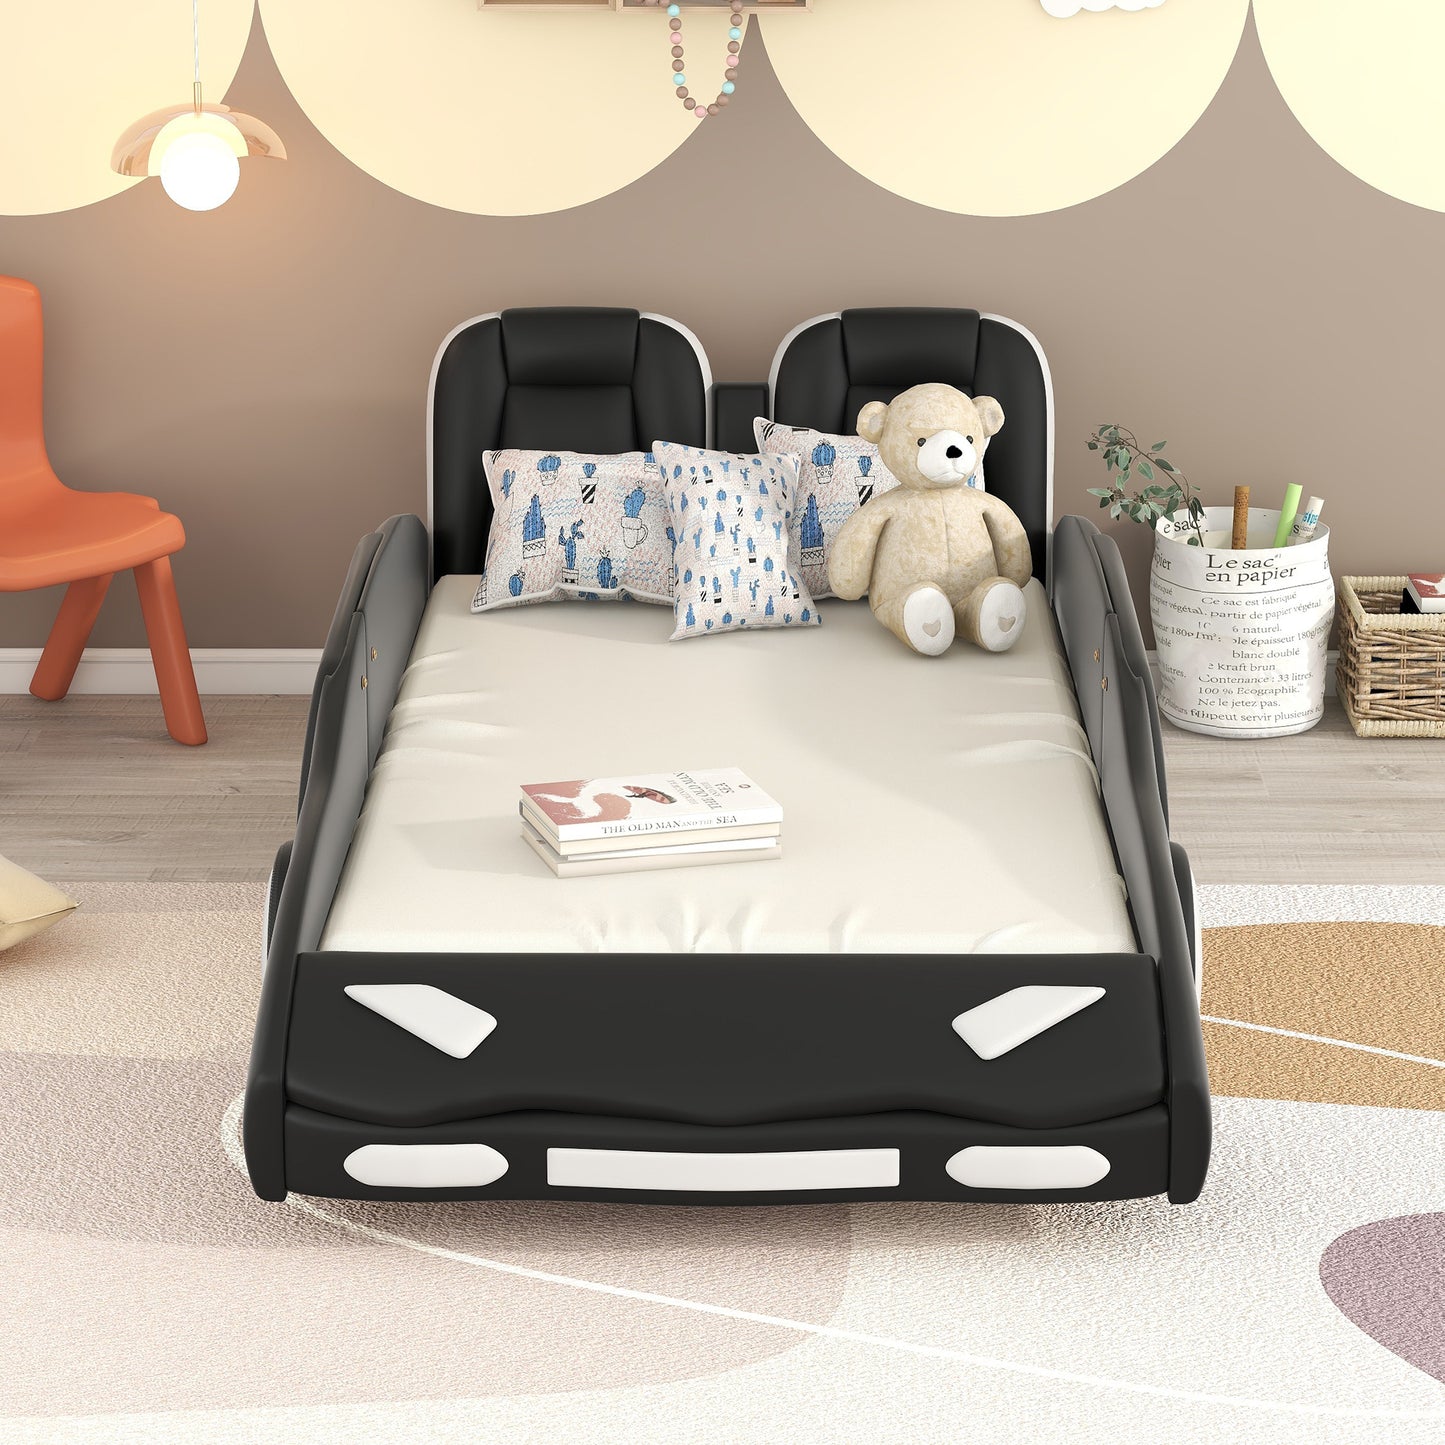 Twin Size Race Car-Shaped Platform Bed with Wheels, Black